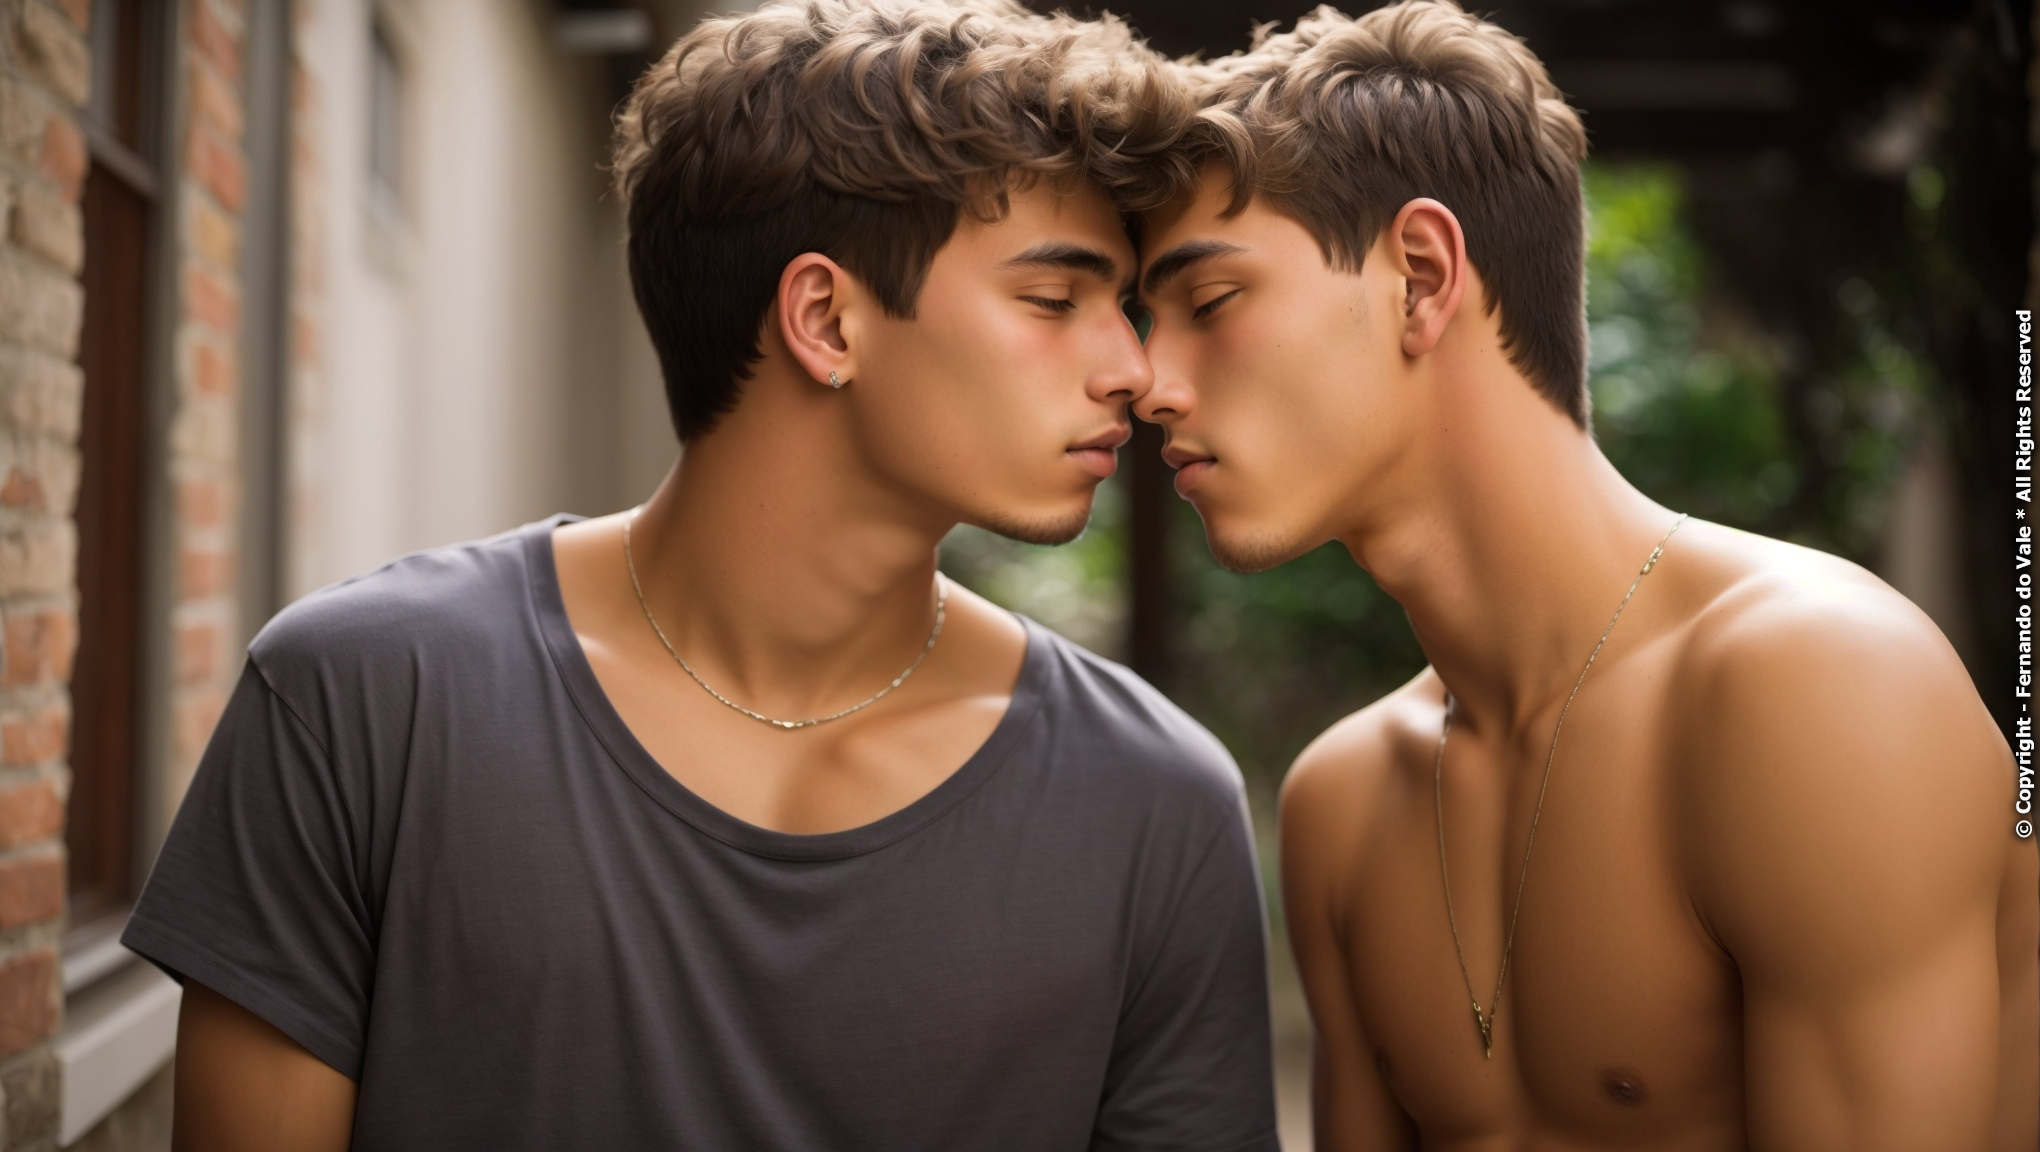 Challenges and Triumphs of Modern Gay Relationships